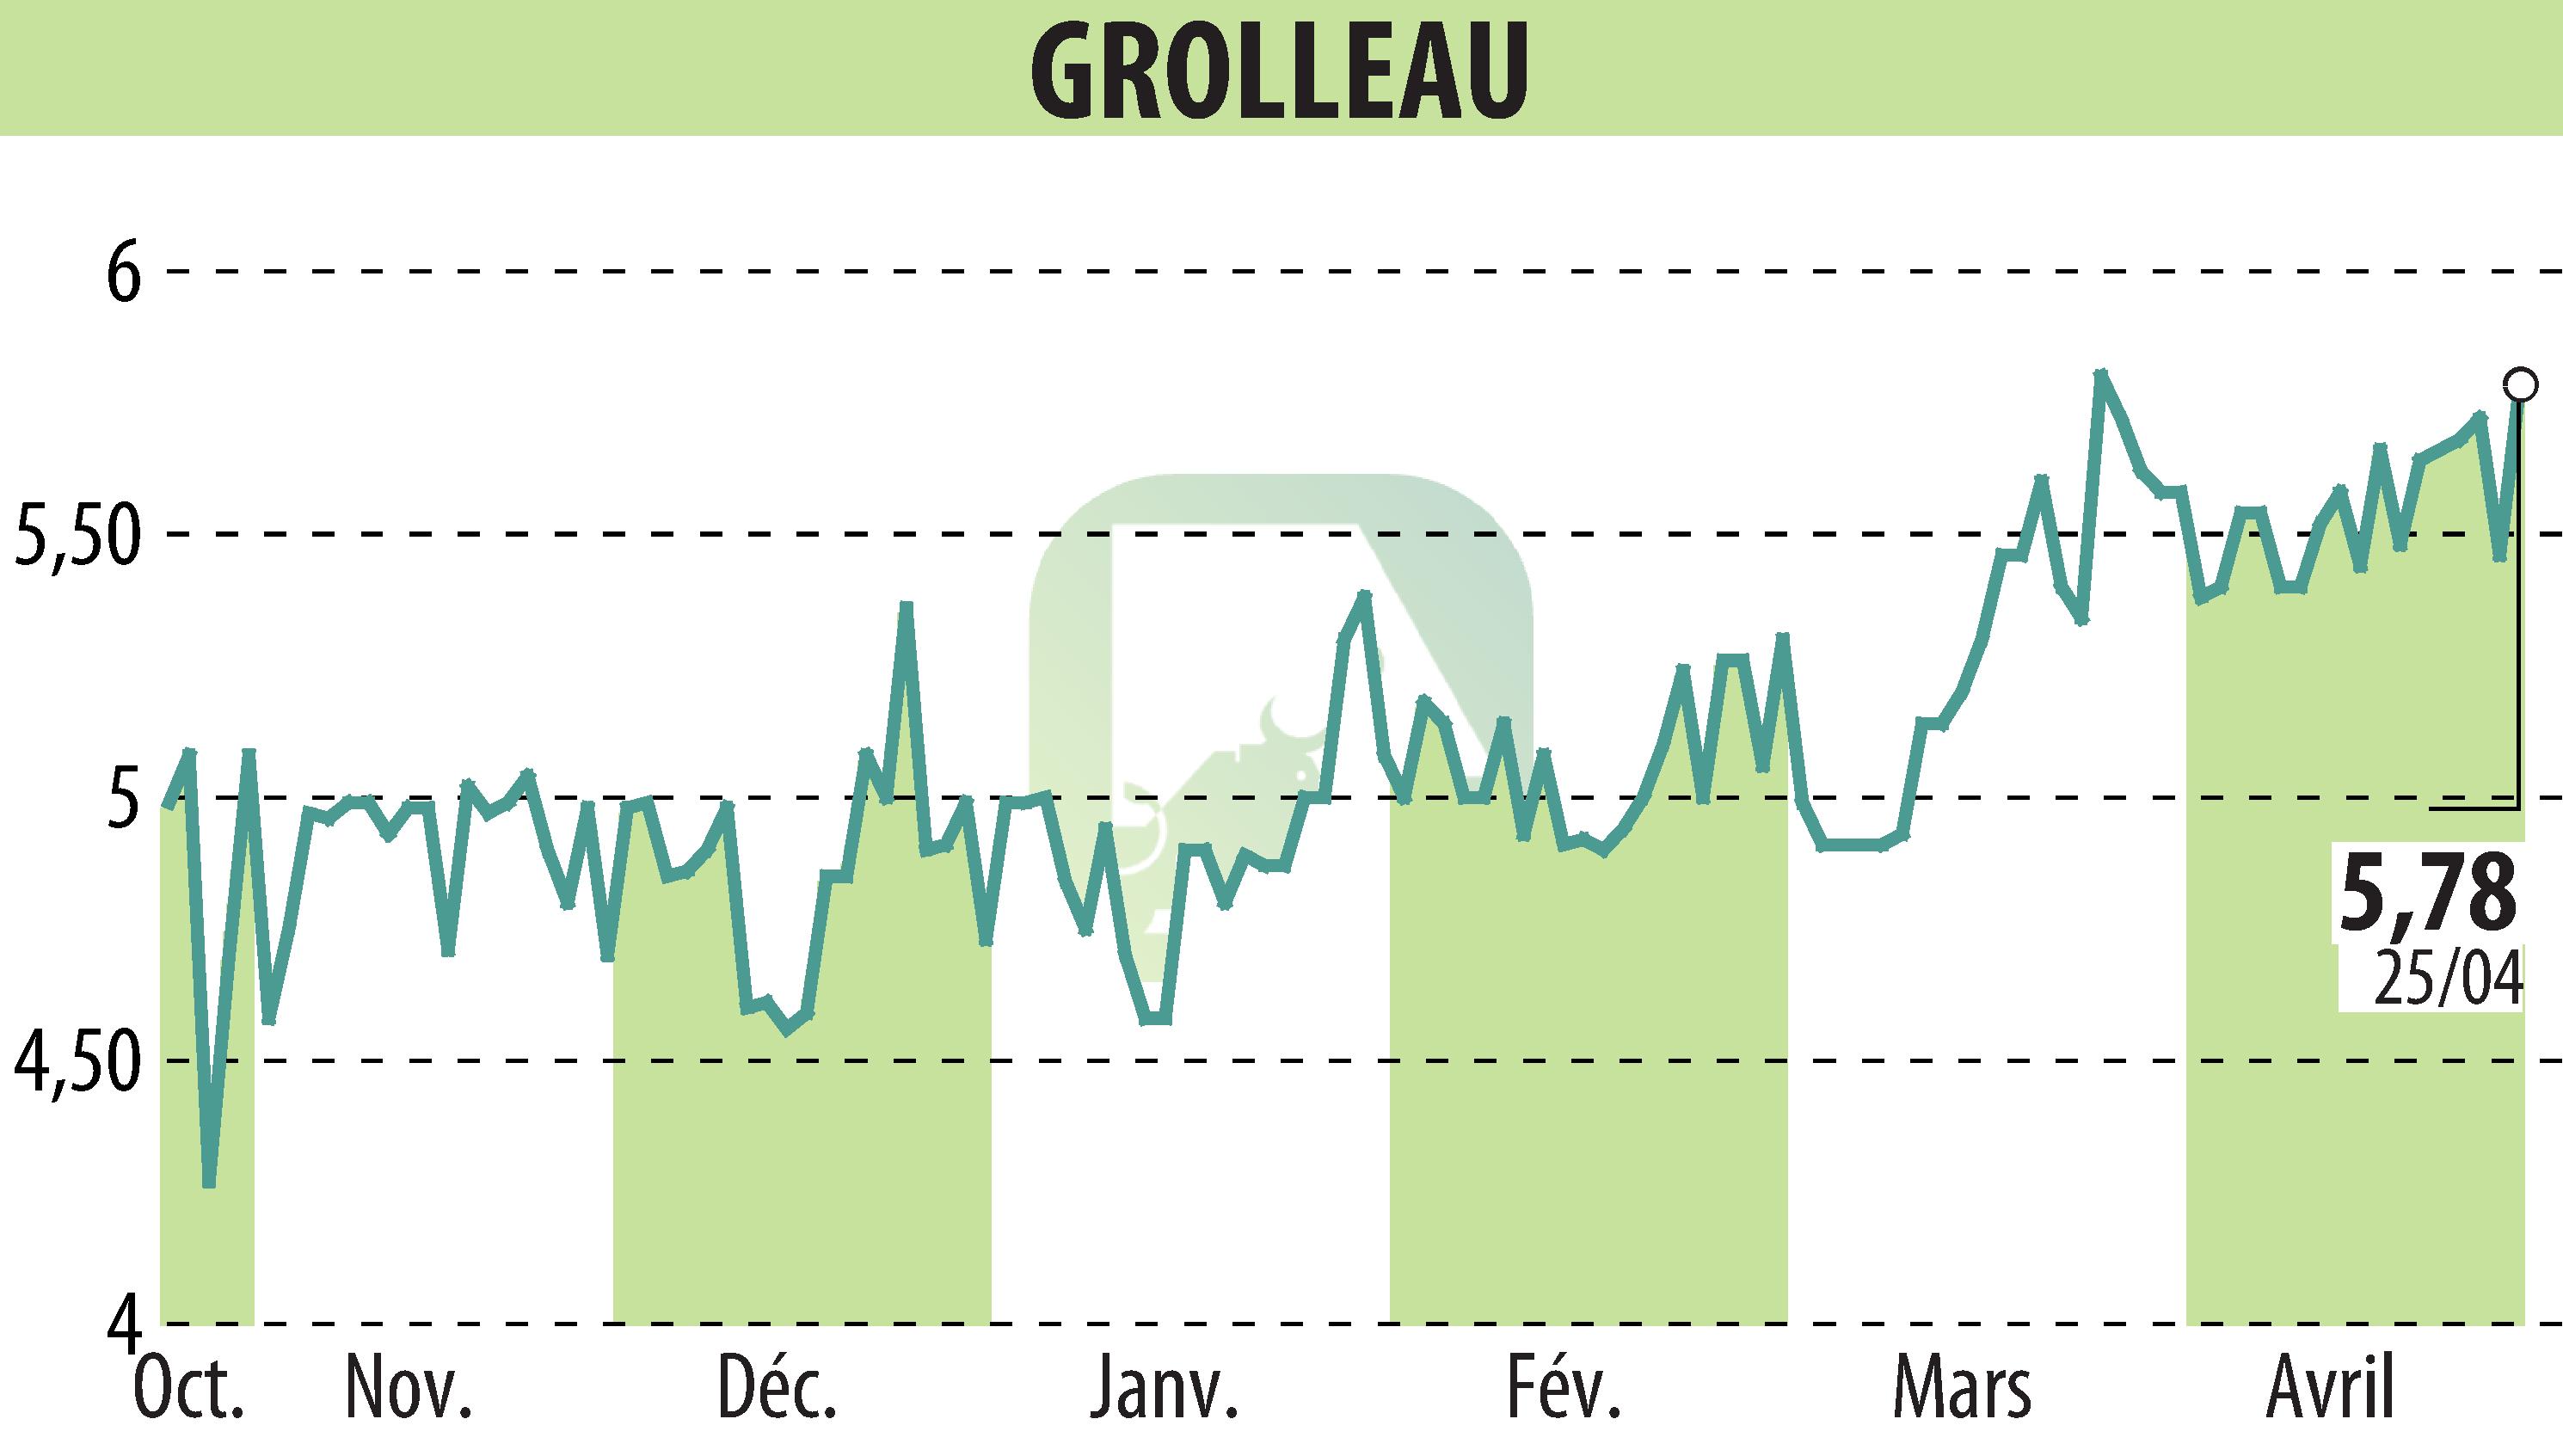 Stock price chart of GROLLEAU (EPA:ALGRO) showing fluctuations.